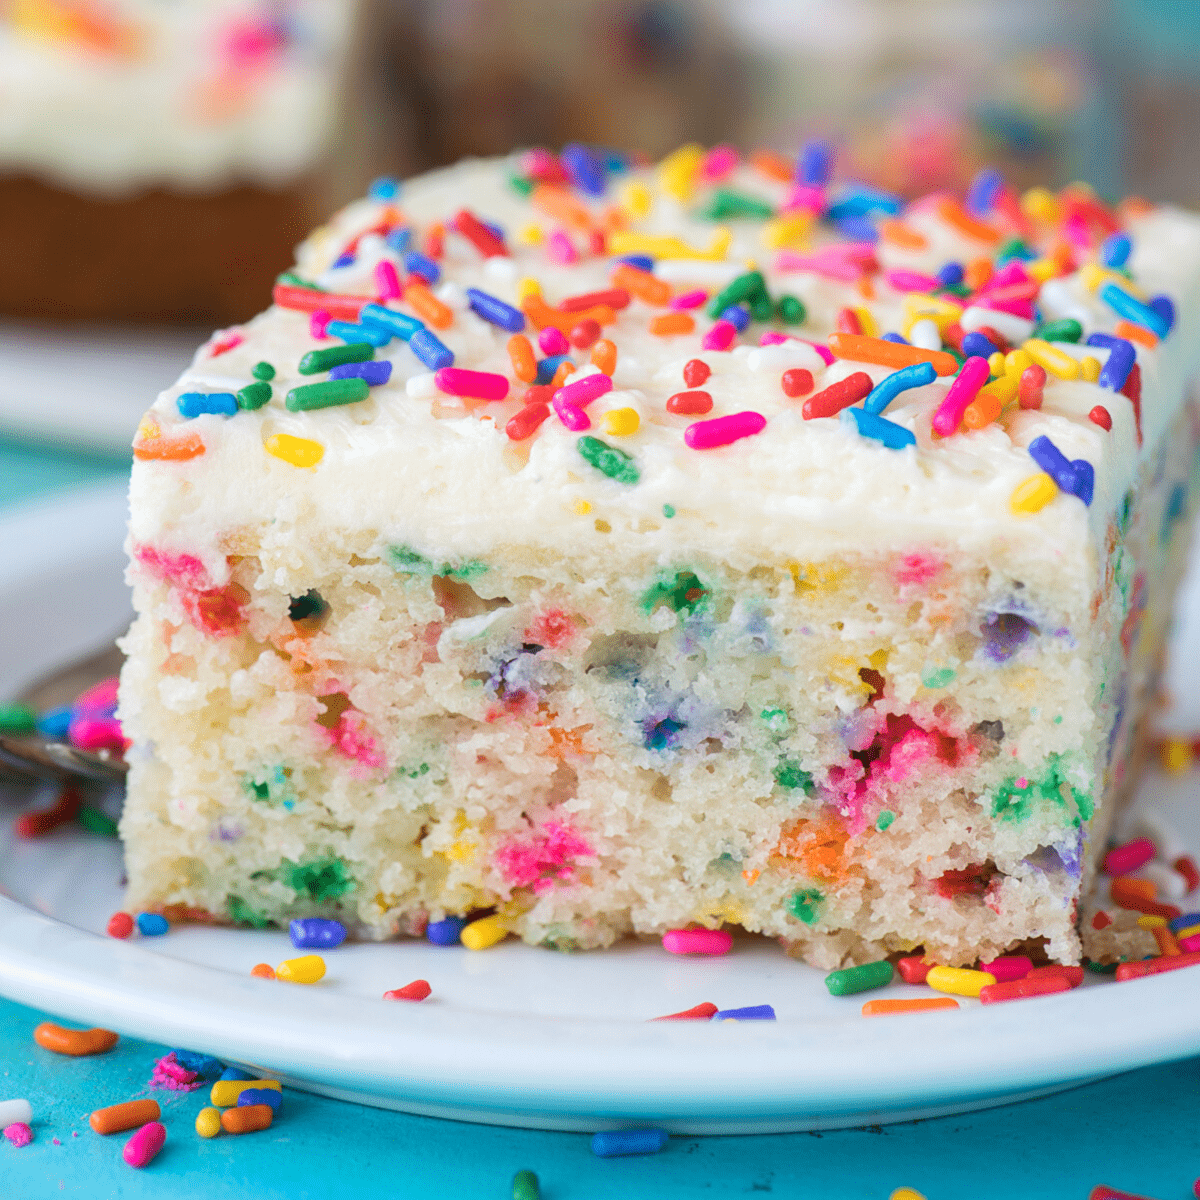 9 Glittered Life-sized Multi-Layer Cake With Sprinkles